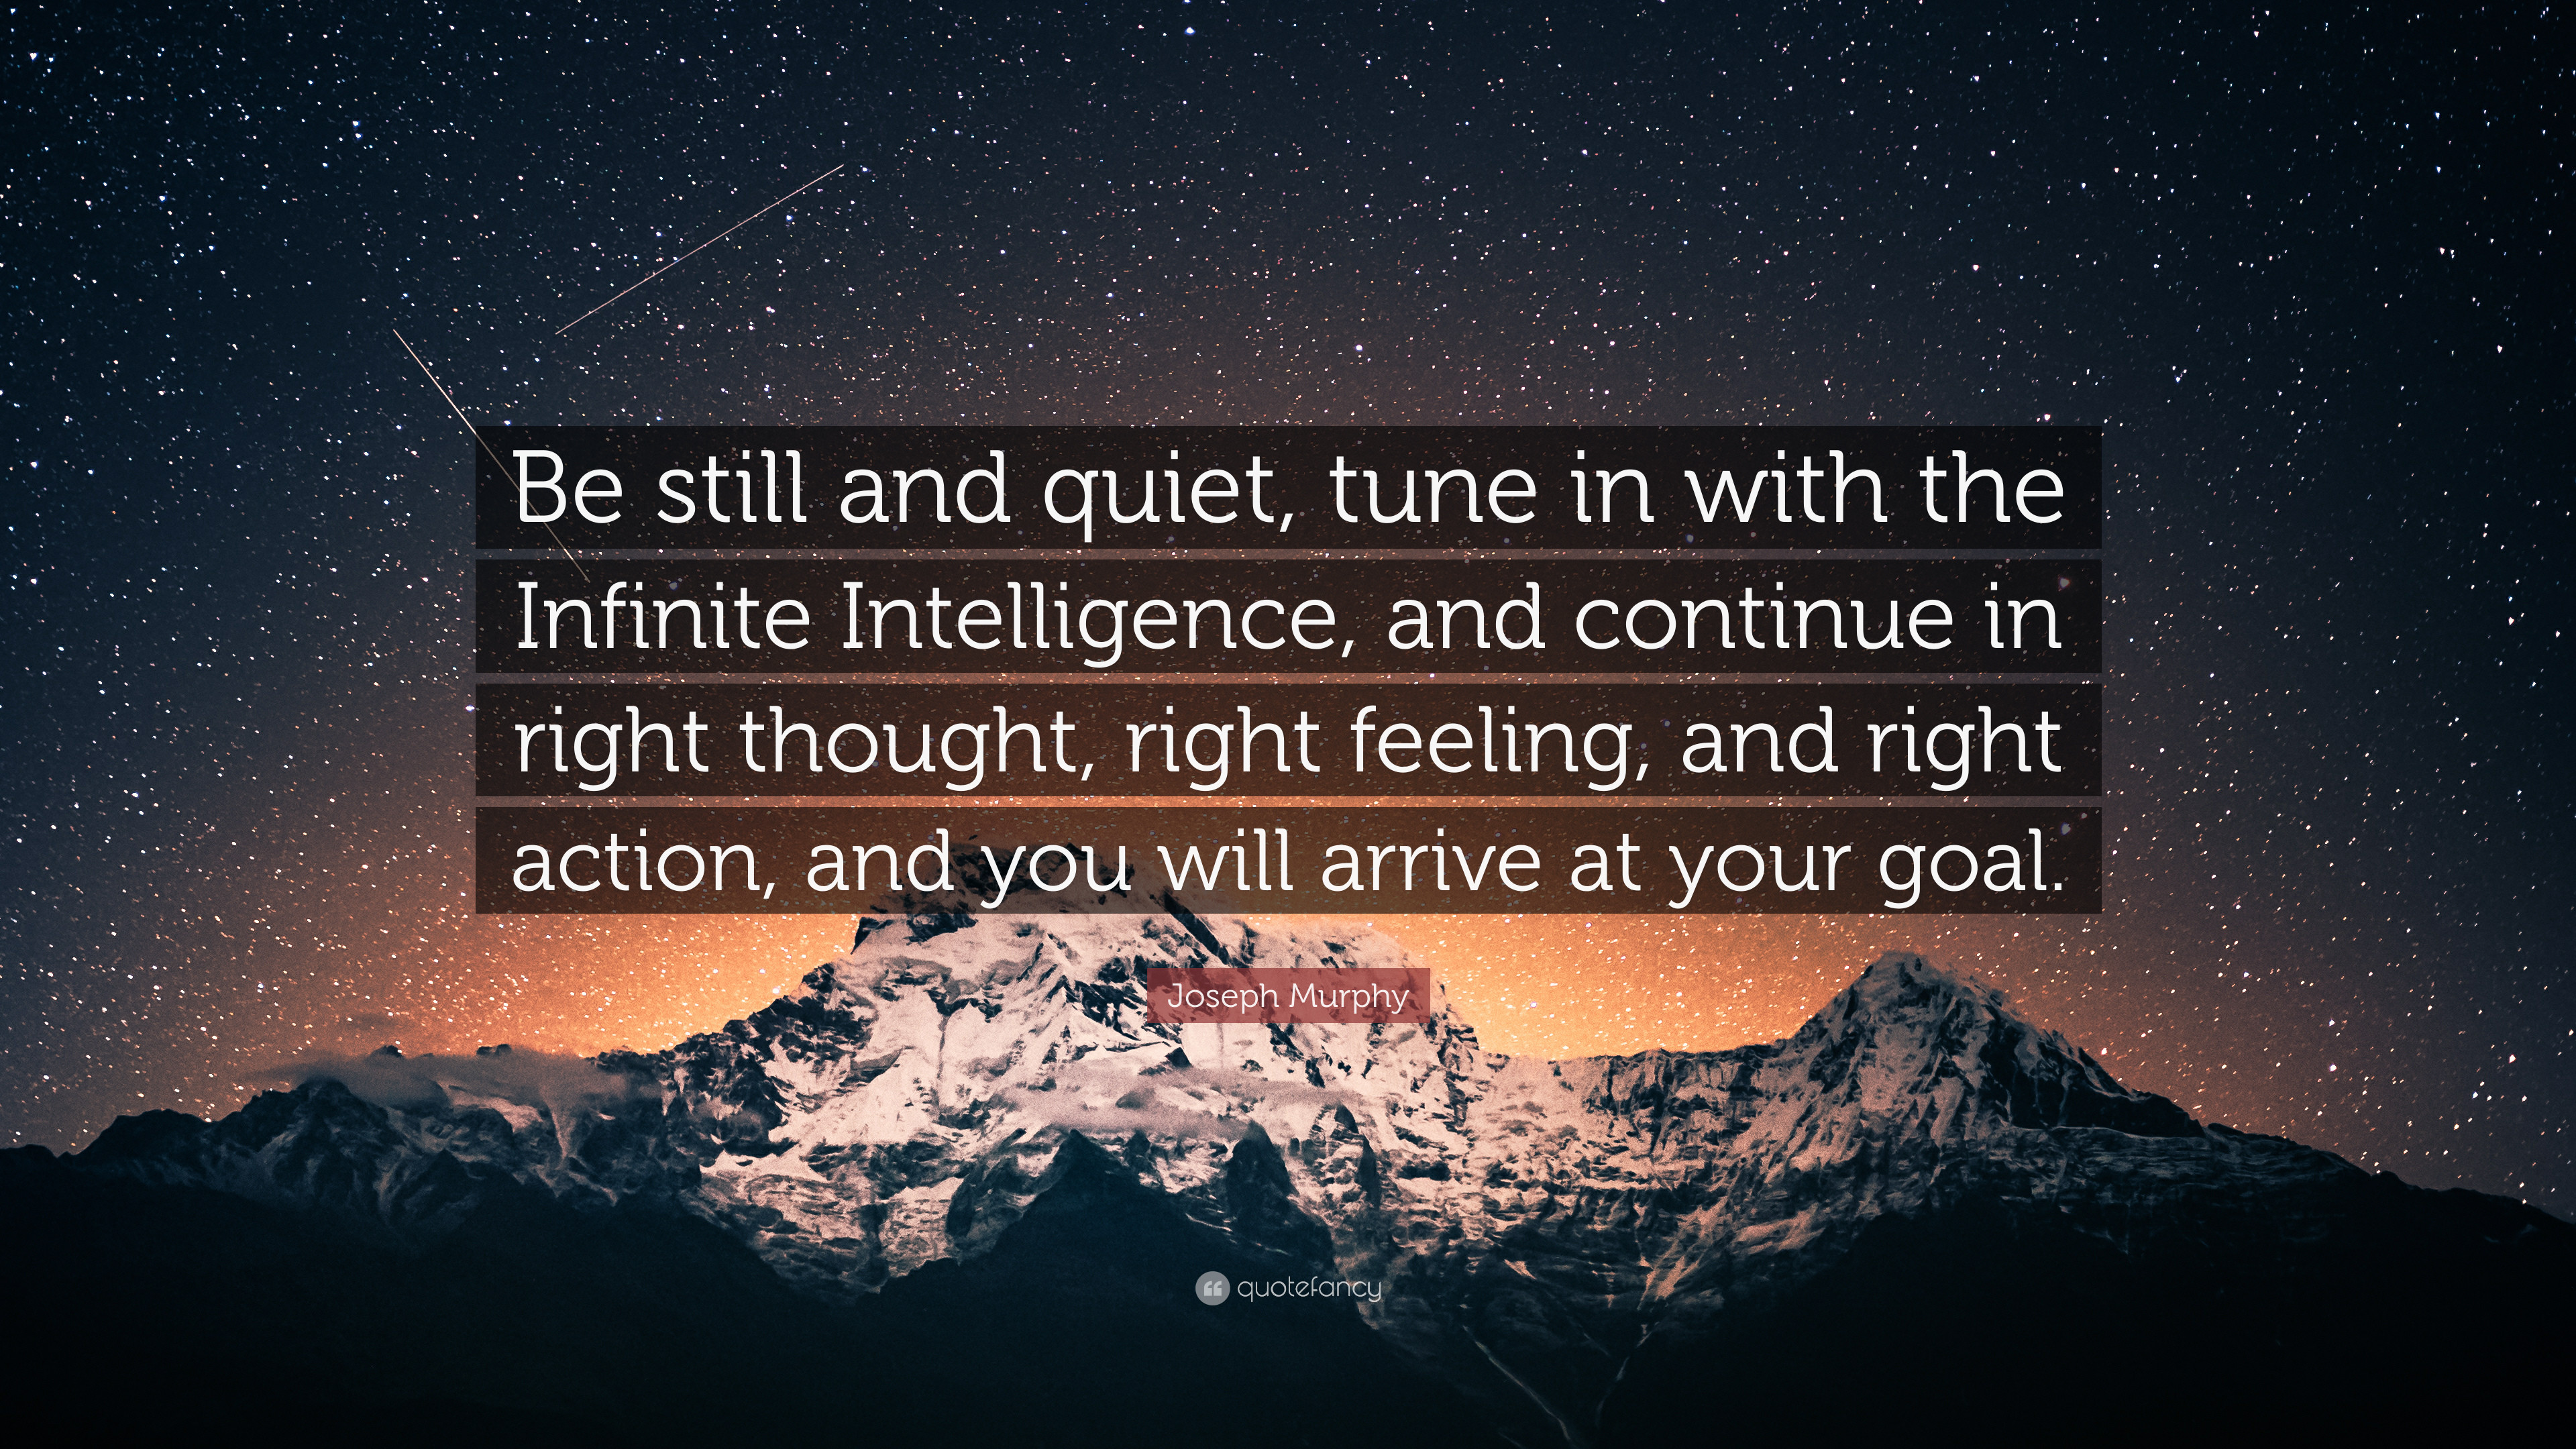 3840x2160 Joseph Murphy Quote: “Be still and quiet, tune in with the Infinite  Intelligence